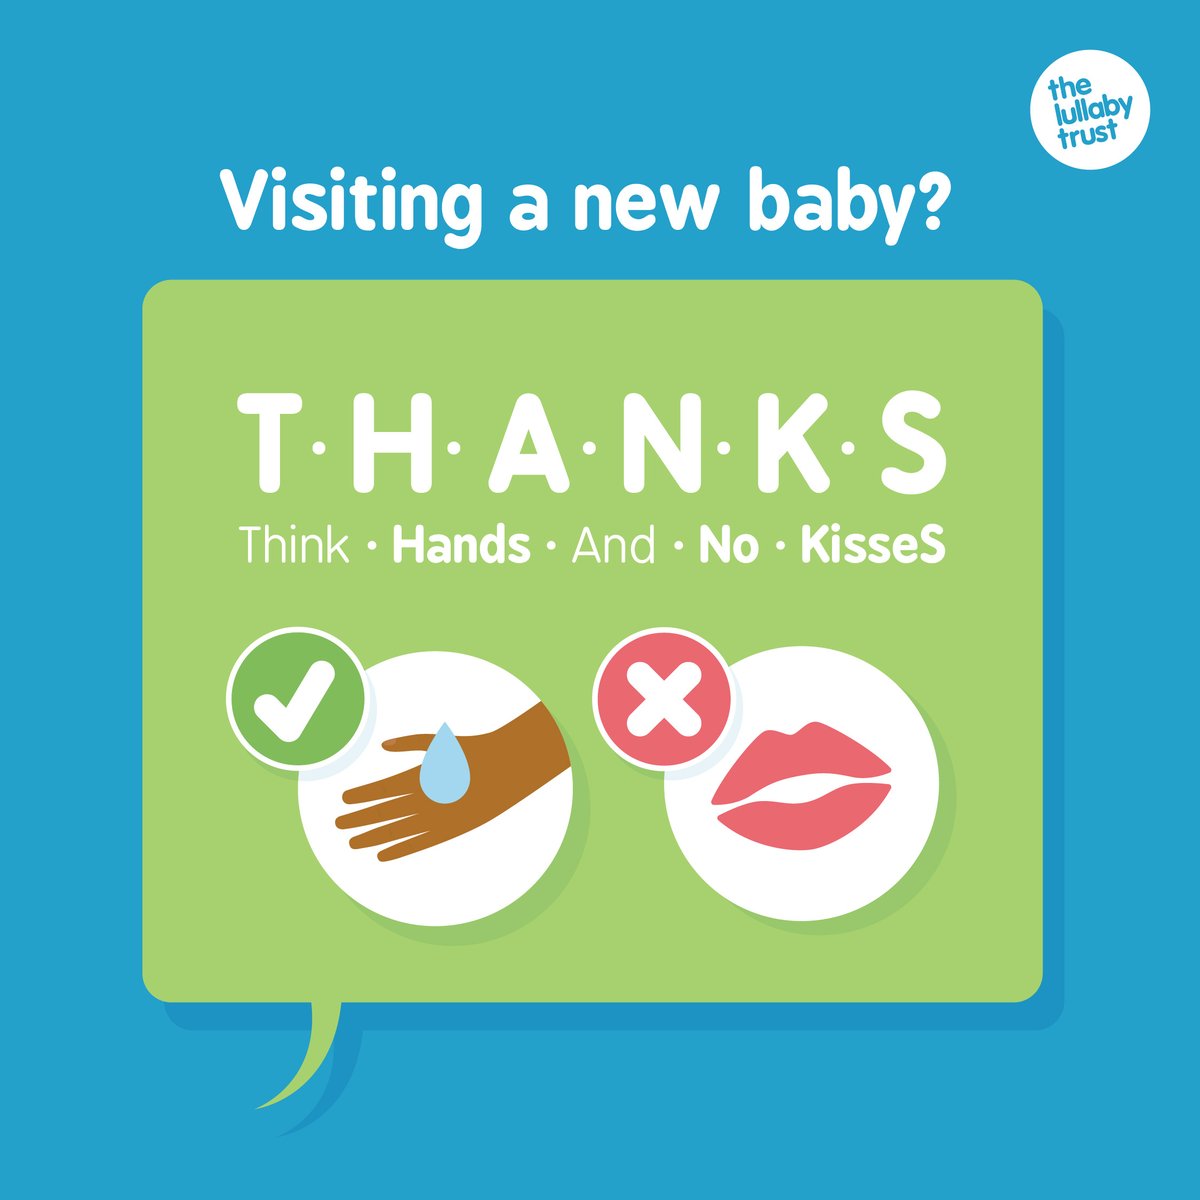 Newborns are particularly vulnerable to infection so all visitors must wash their hands before touching baby and avoid kissing them. We call this our THANKS guidance – Think Hands And No KisseS. Check out our posts from the THANKS launch event back in mid-October.